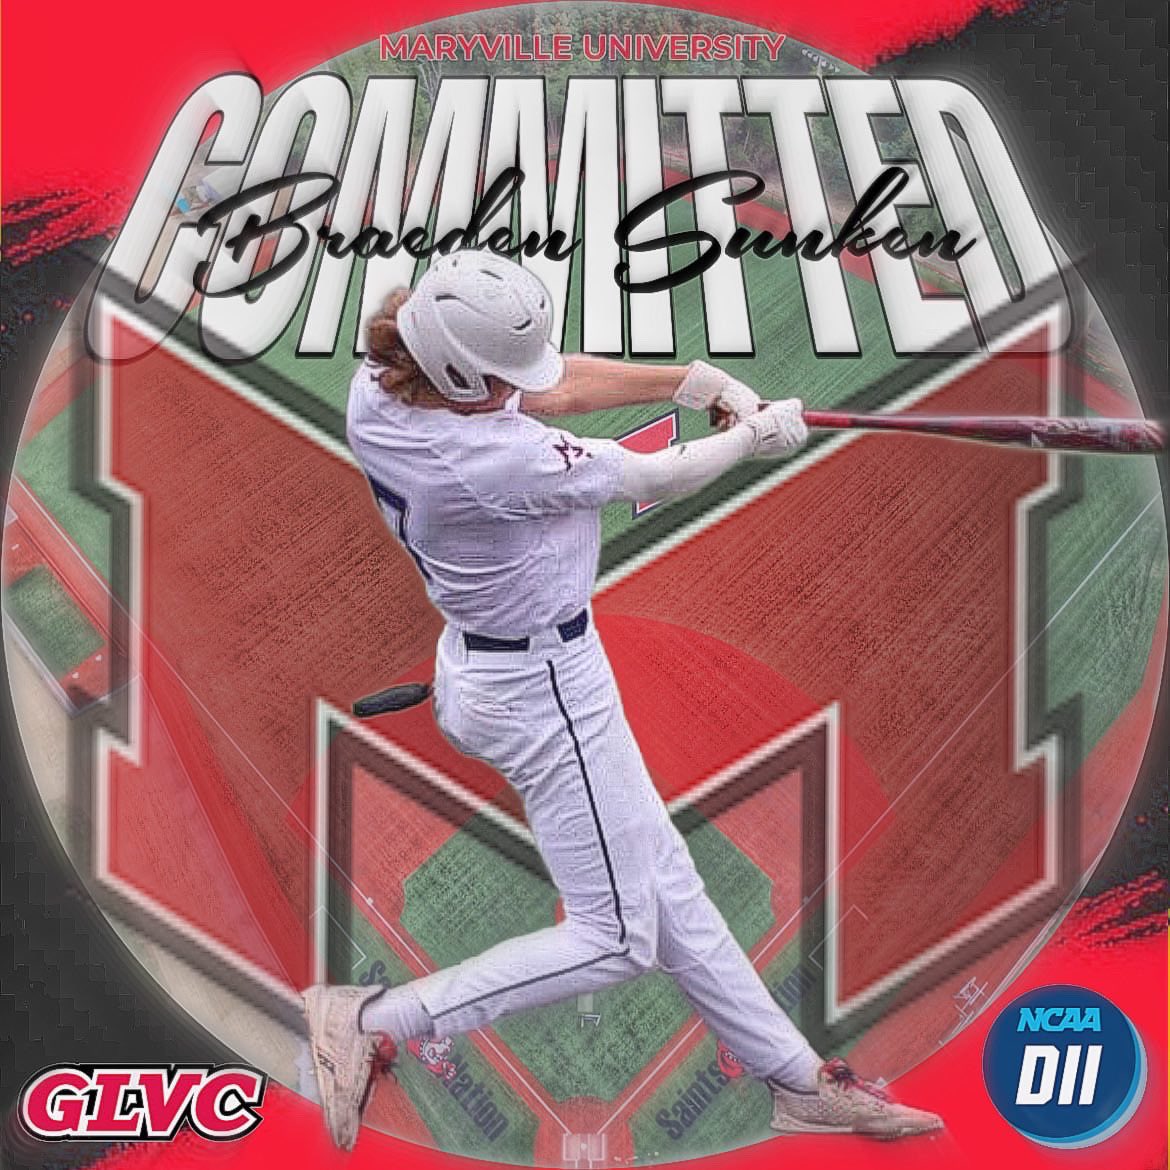 I’m extremely excited to announce my commitment to Maryville University to further my athletic and academic career. I want to thank my family, teammates, friends, and coaches for all of the support they’ve given me throughout 🐶 #saintsnation